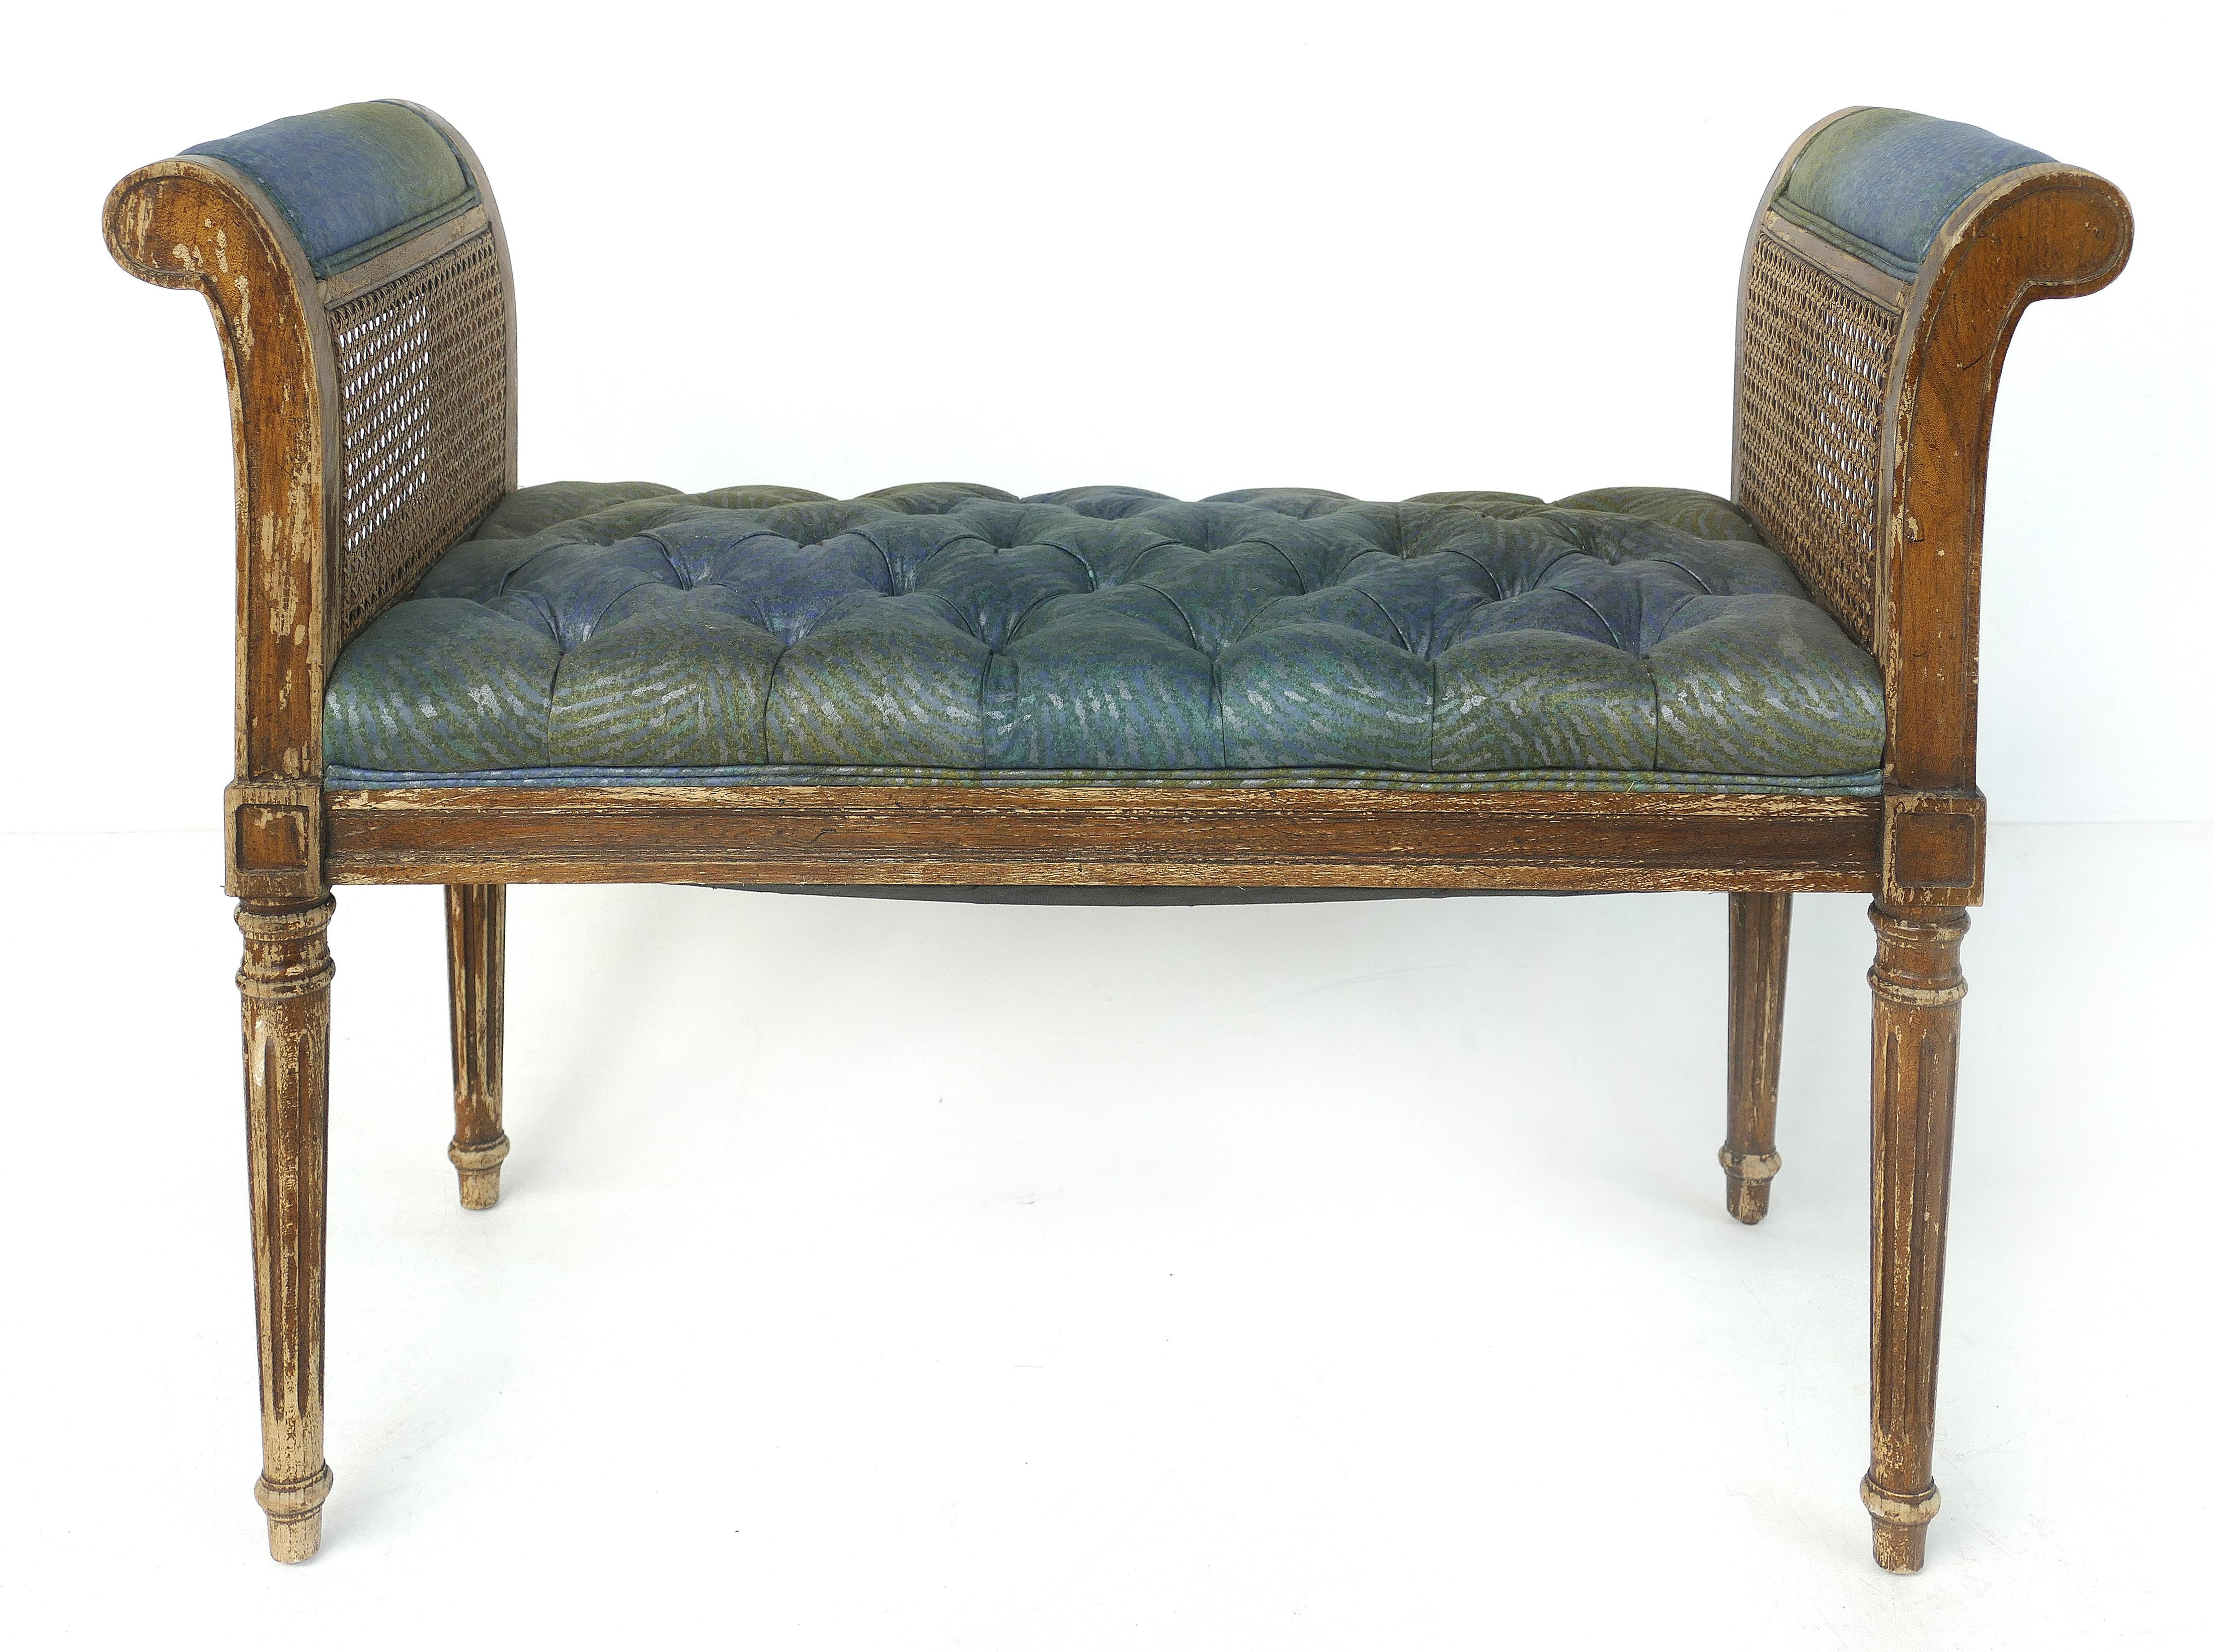 19th century Louis XVI style caned benches with tufted seats and tapering, conical feet

Offered for sale is a pair of Louis XVI style caned benches with tufted upholstered seats. These lovely benches date to the end of the 19th century or